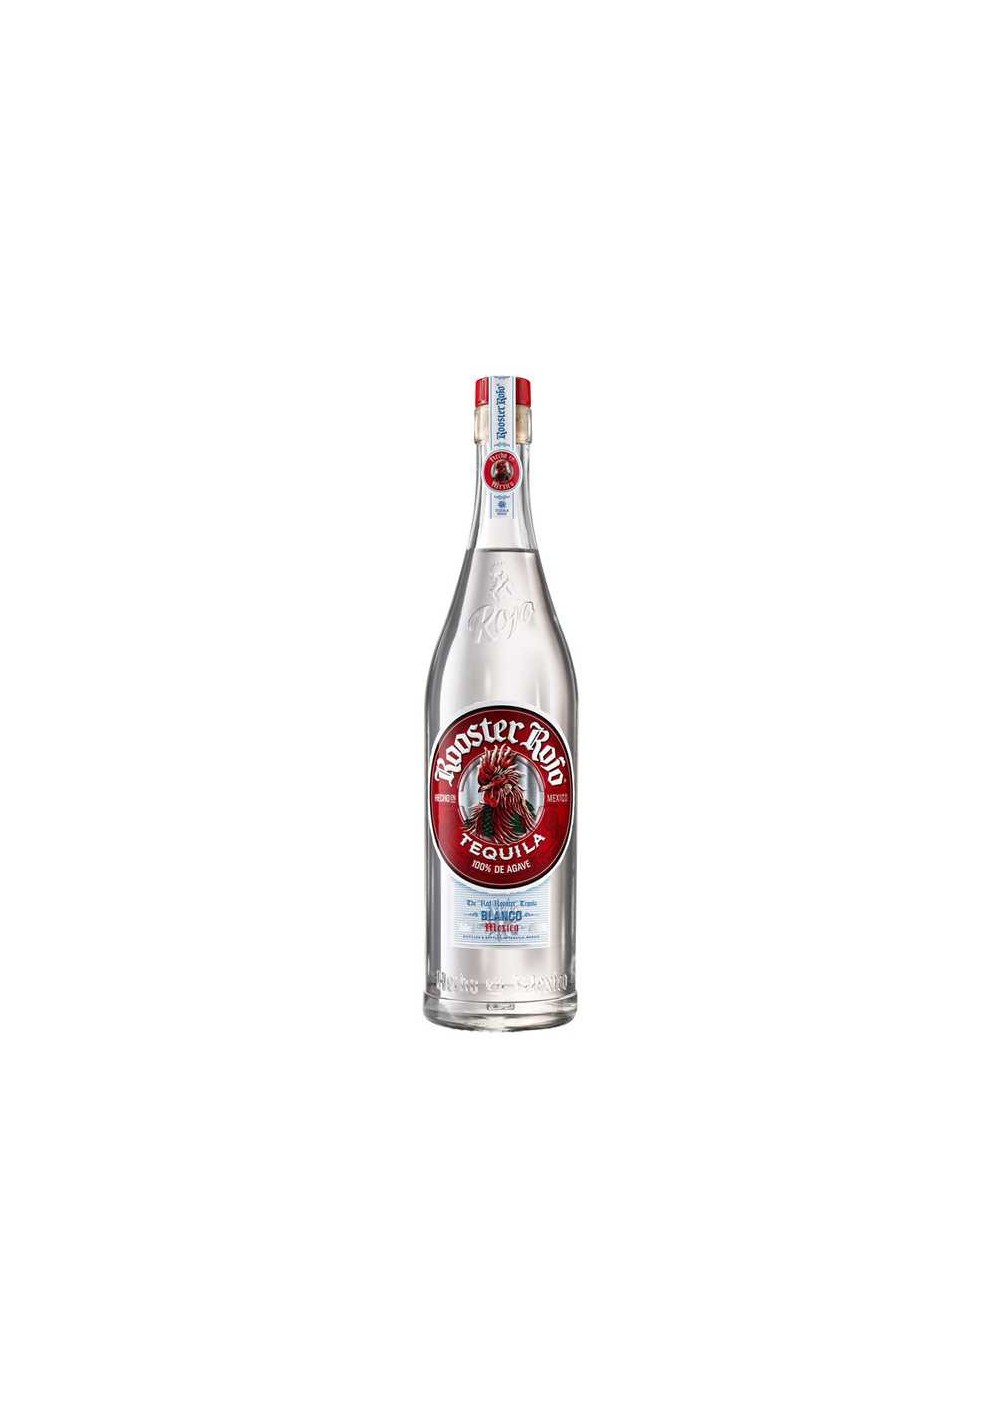 Rooster Rojo - Tequila blanco - (70cl)